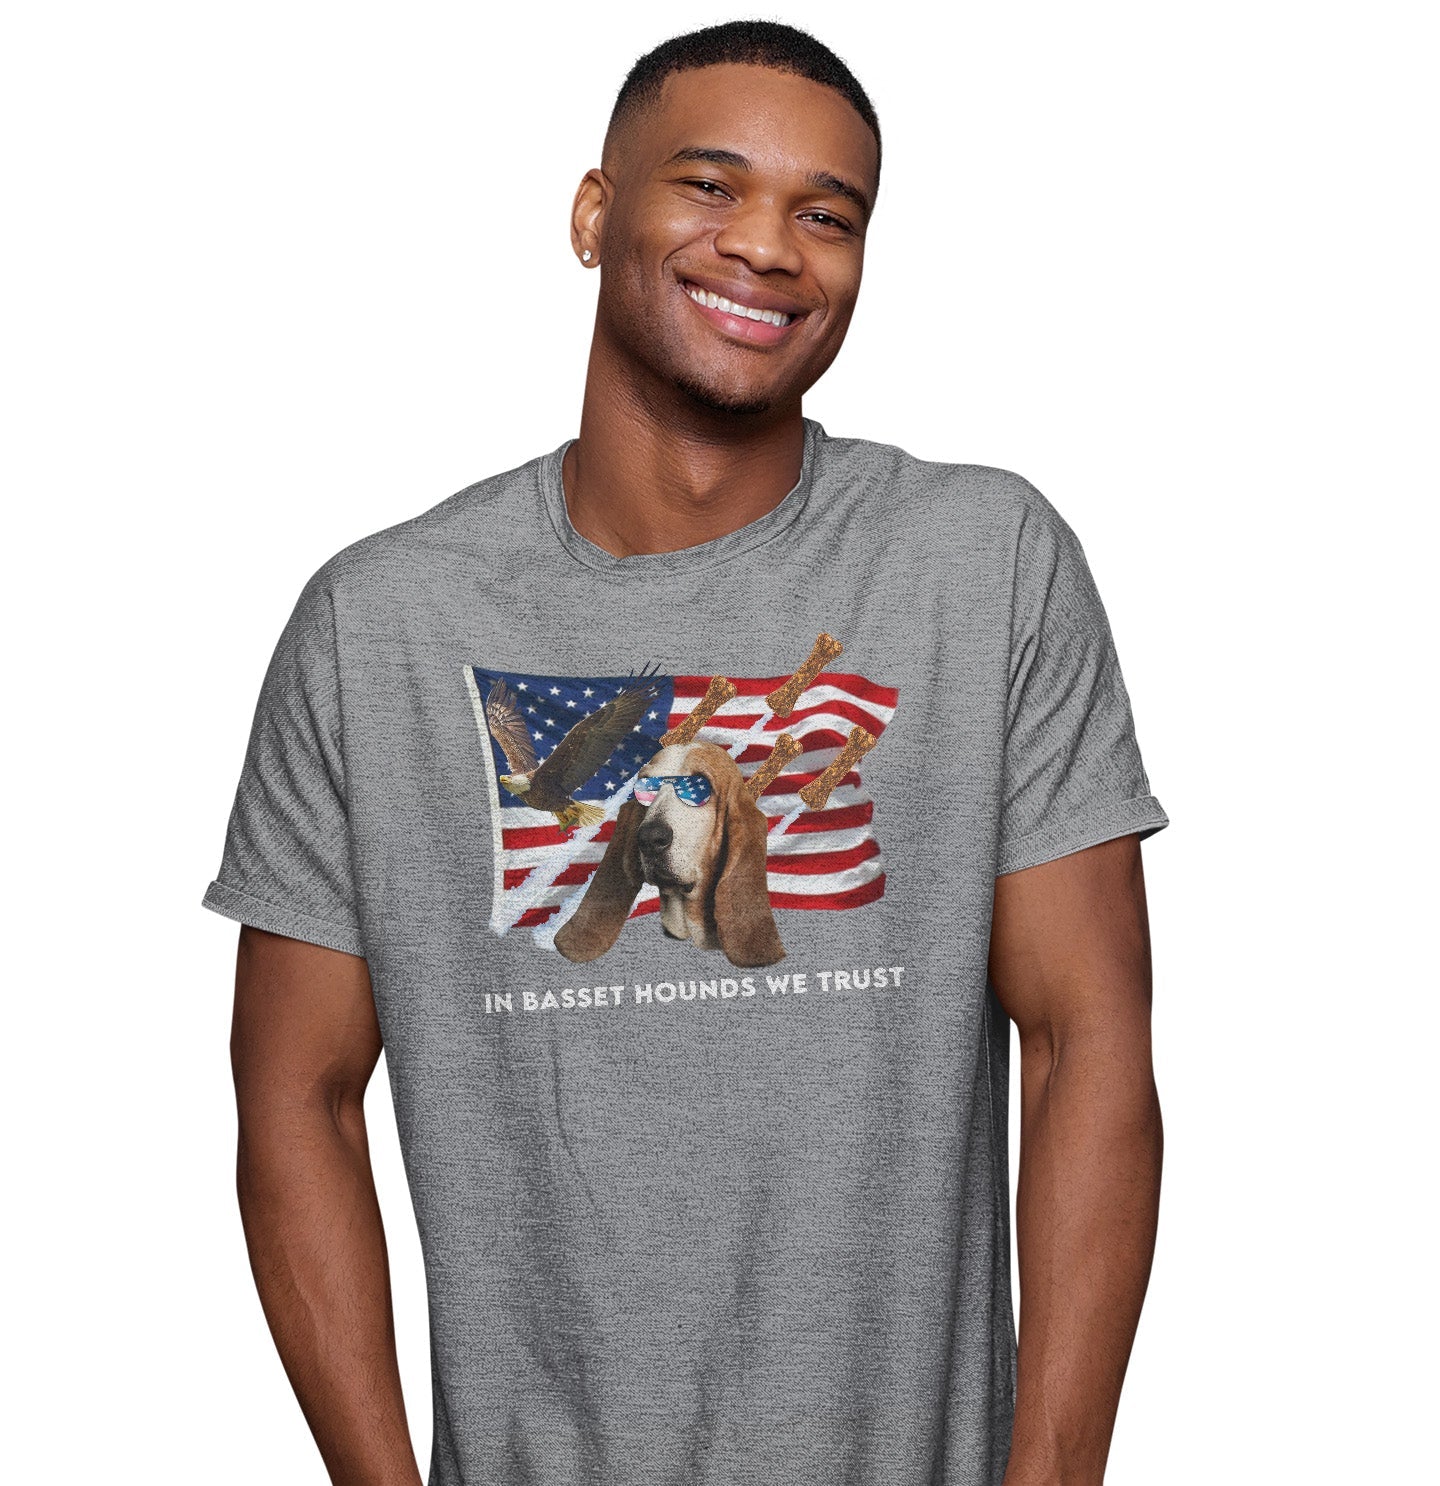 In Basset Hounds We Trust - Adult Unisex T-Shirt